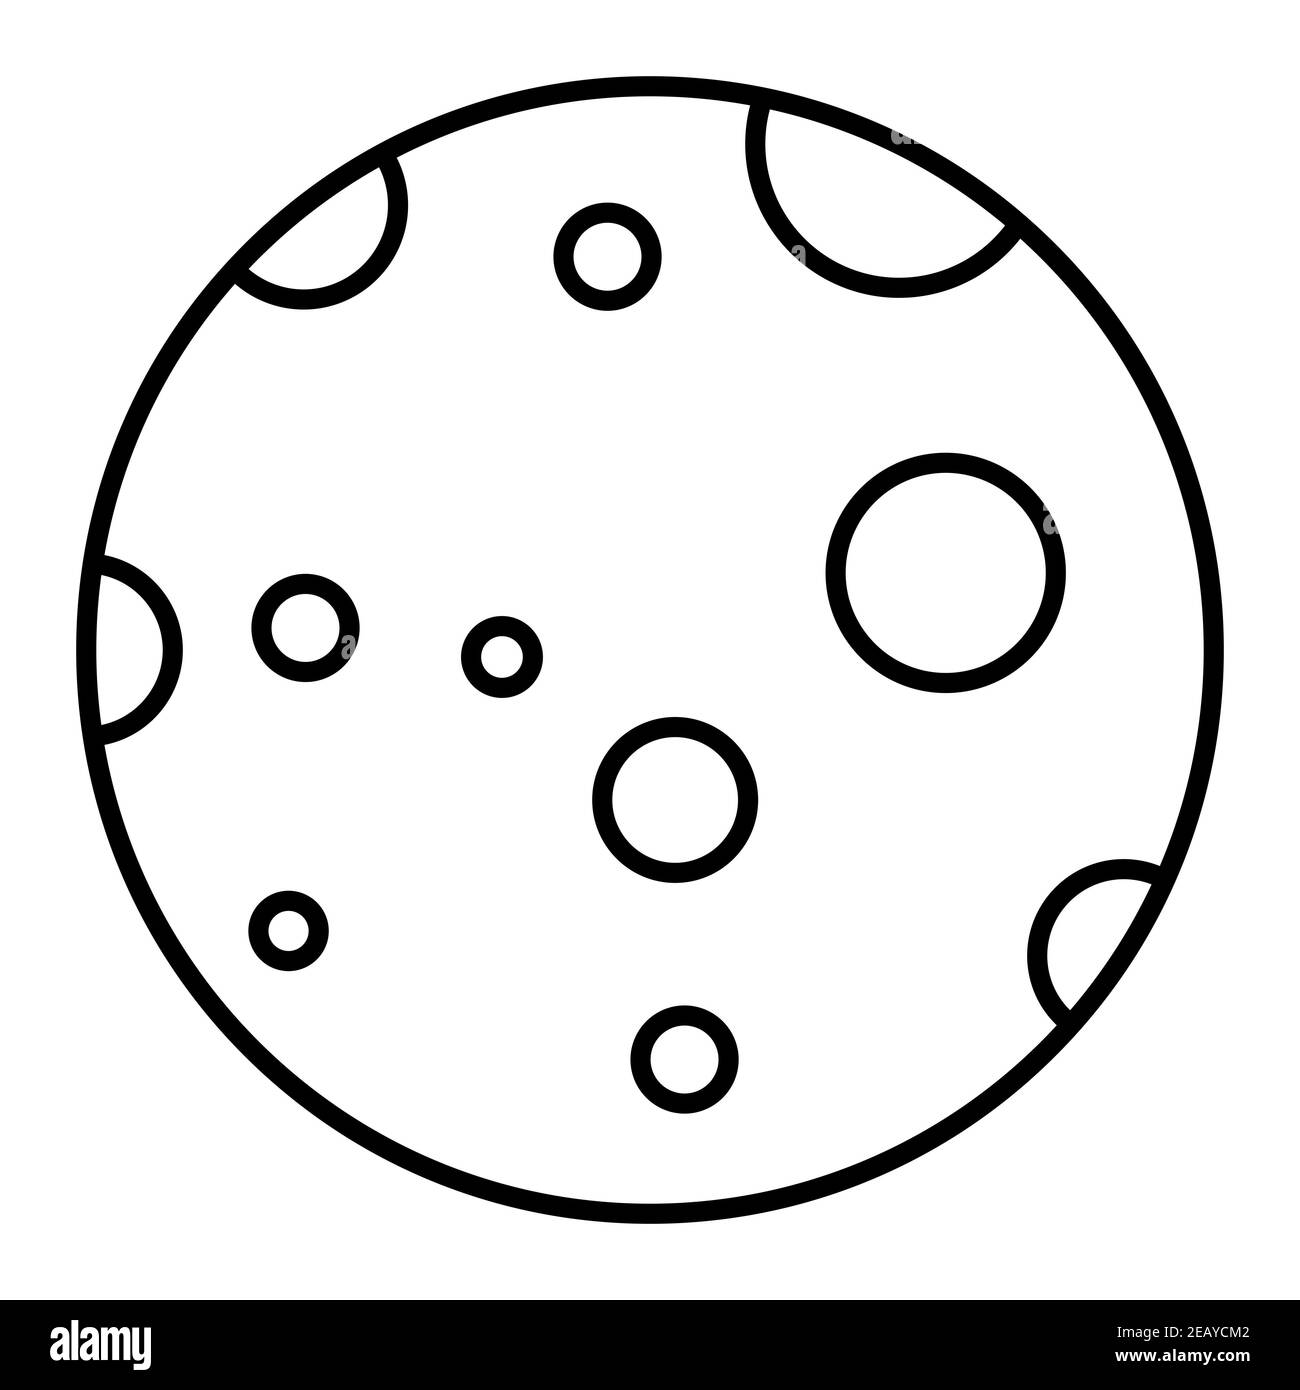 Outline illustration of a Full Moon icon Stock Photo